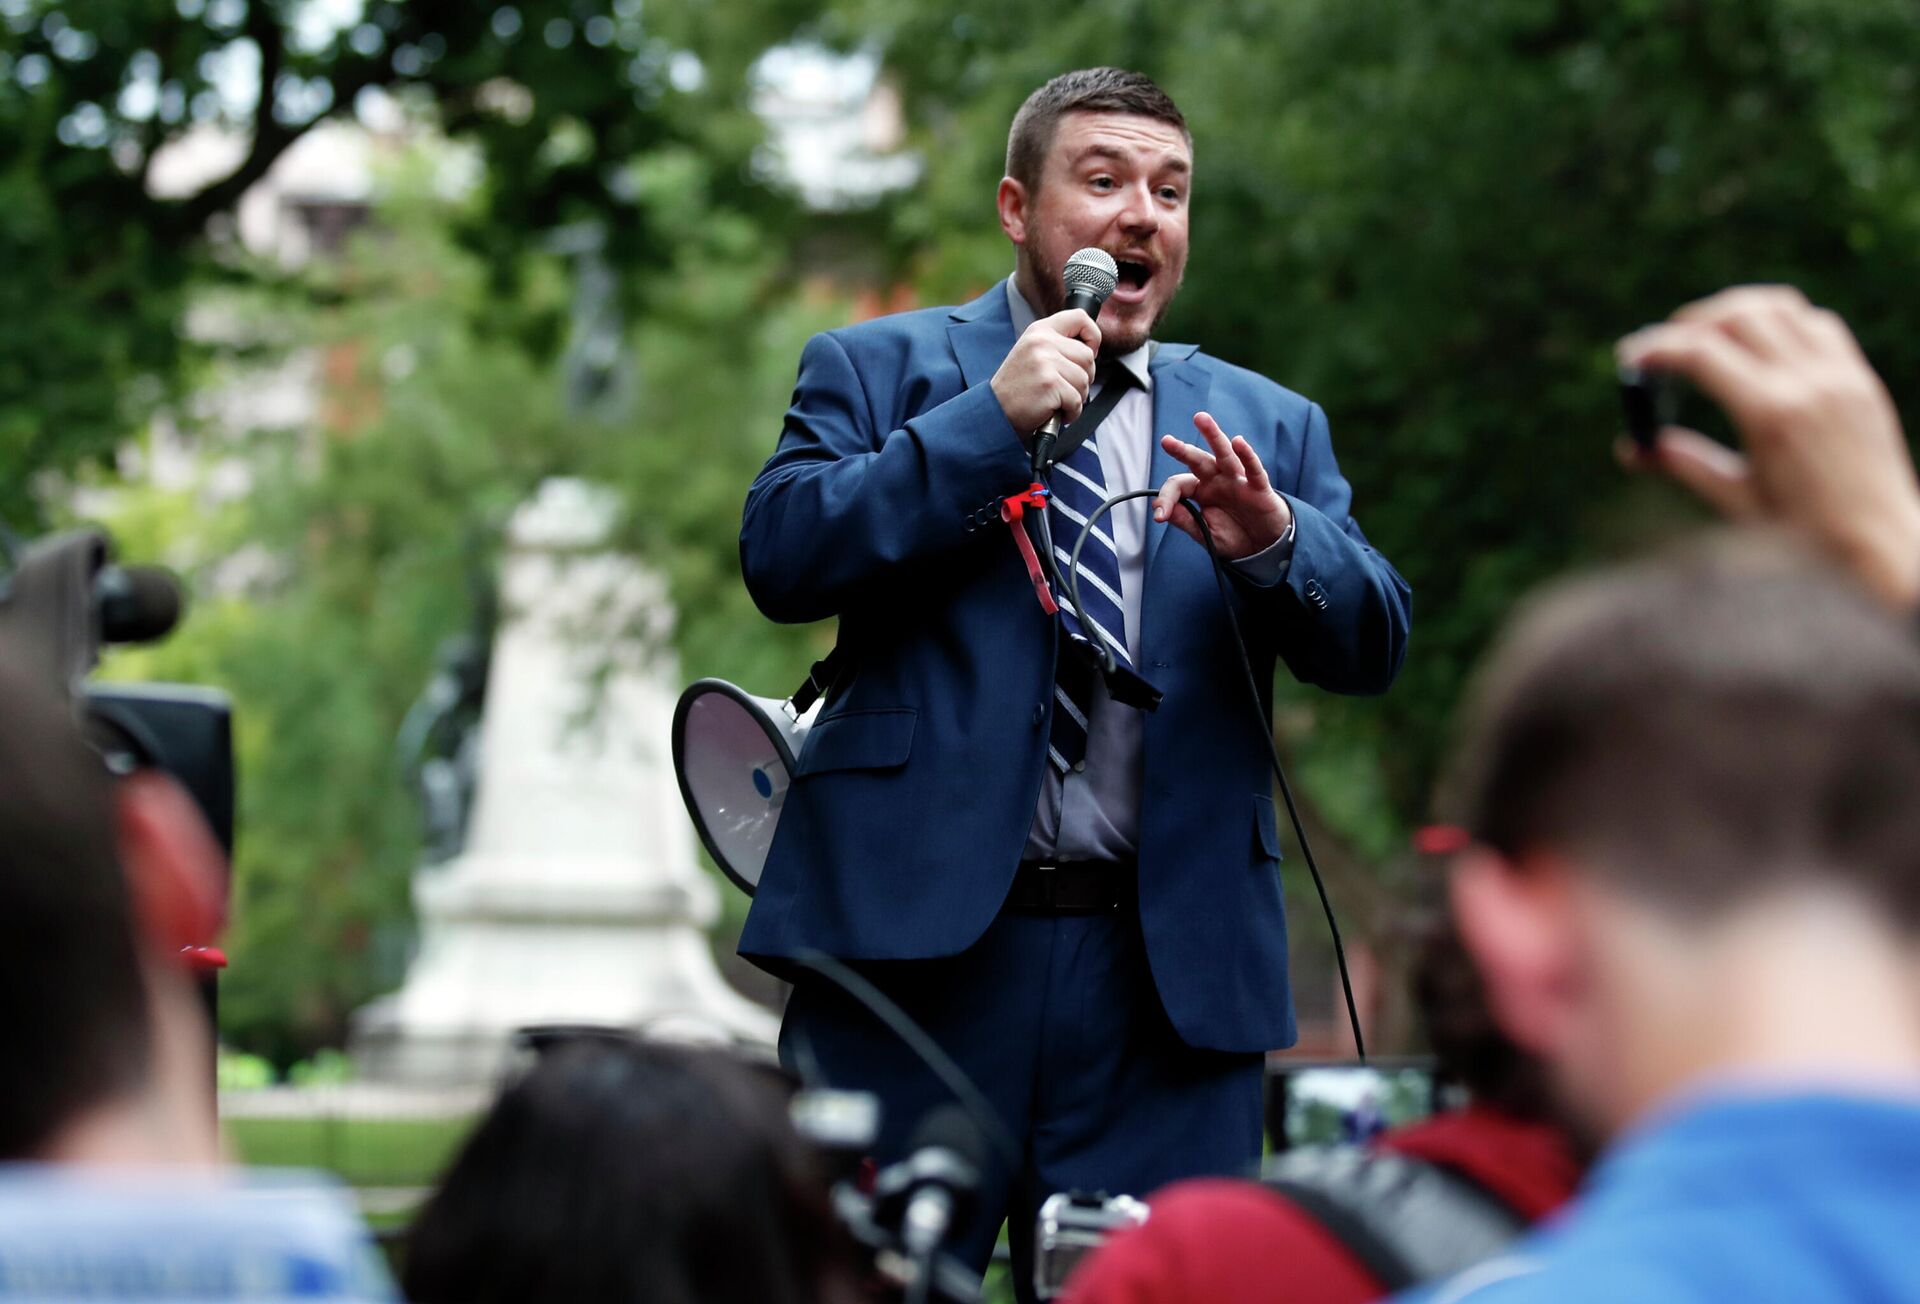 White nationalist Jason Kessler speaks at a rally near the White House on the one-year anniversary of the Charlottesville Unite the Right rally in Washington. A trial is beginning in Charlottesville, Virginia to determine whether white nationalists who planned the so-called “Unite the Right” rally will be held civilly responsible for the violence that erupted. - Sputnik International, 1920, 23.11.2021